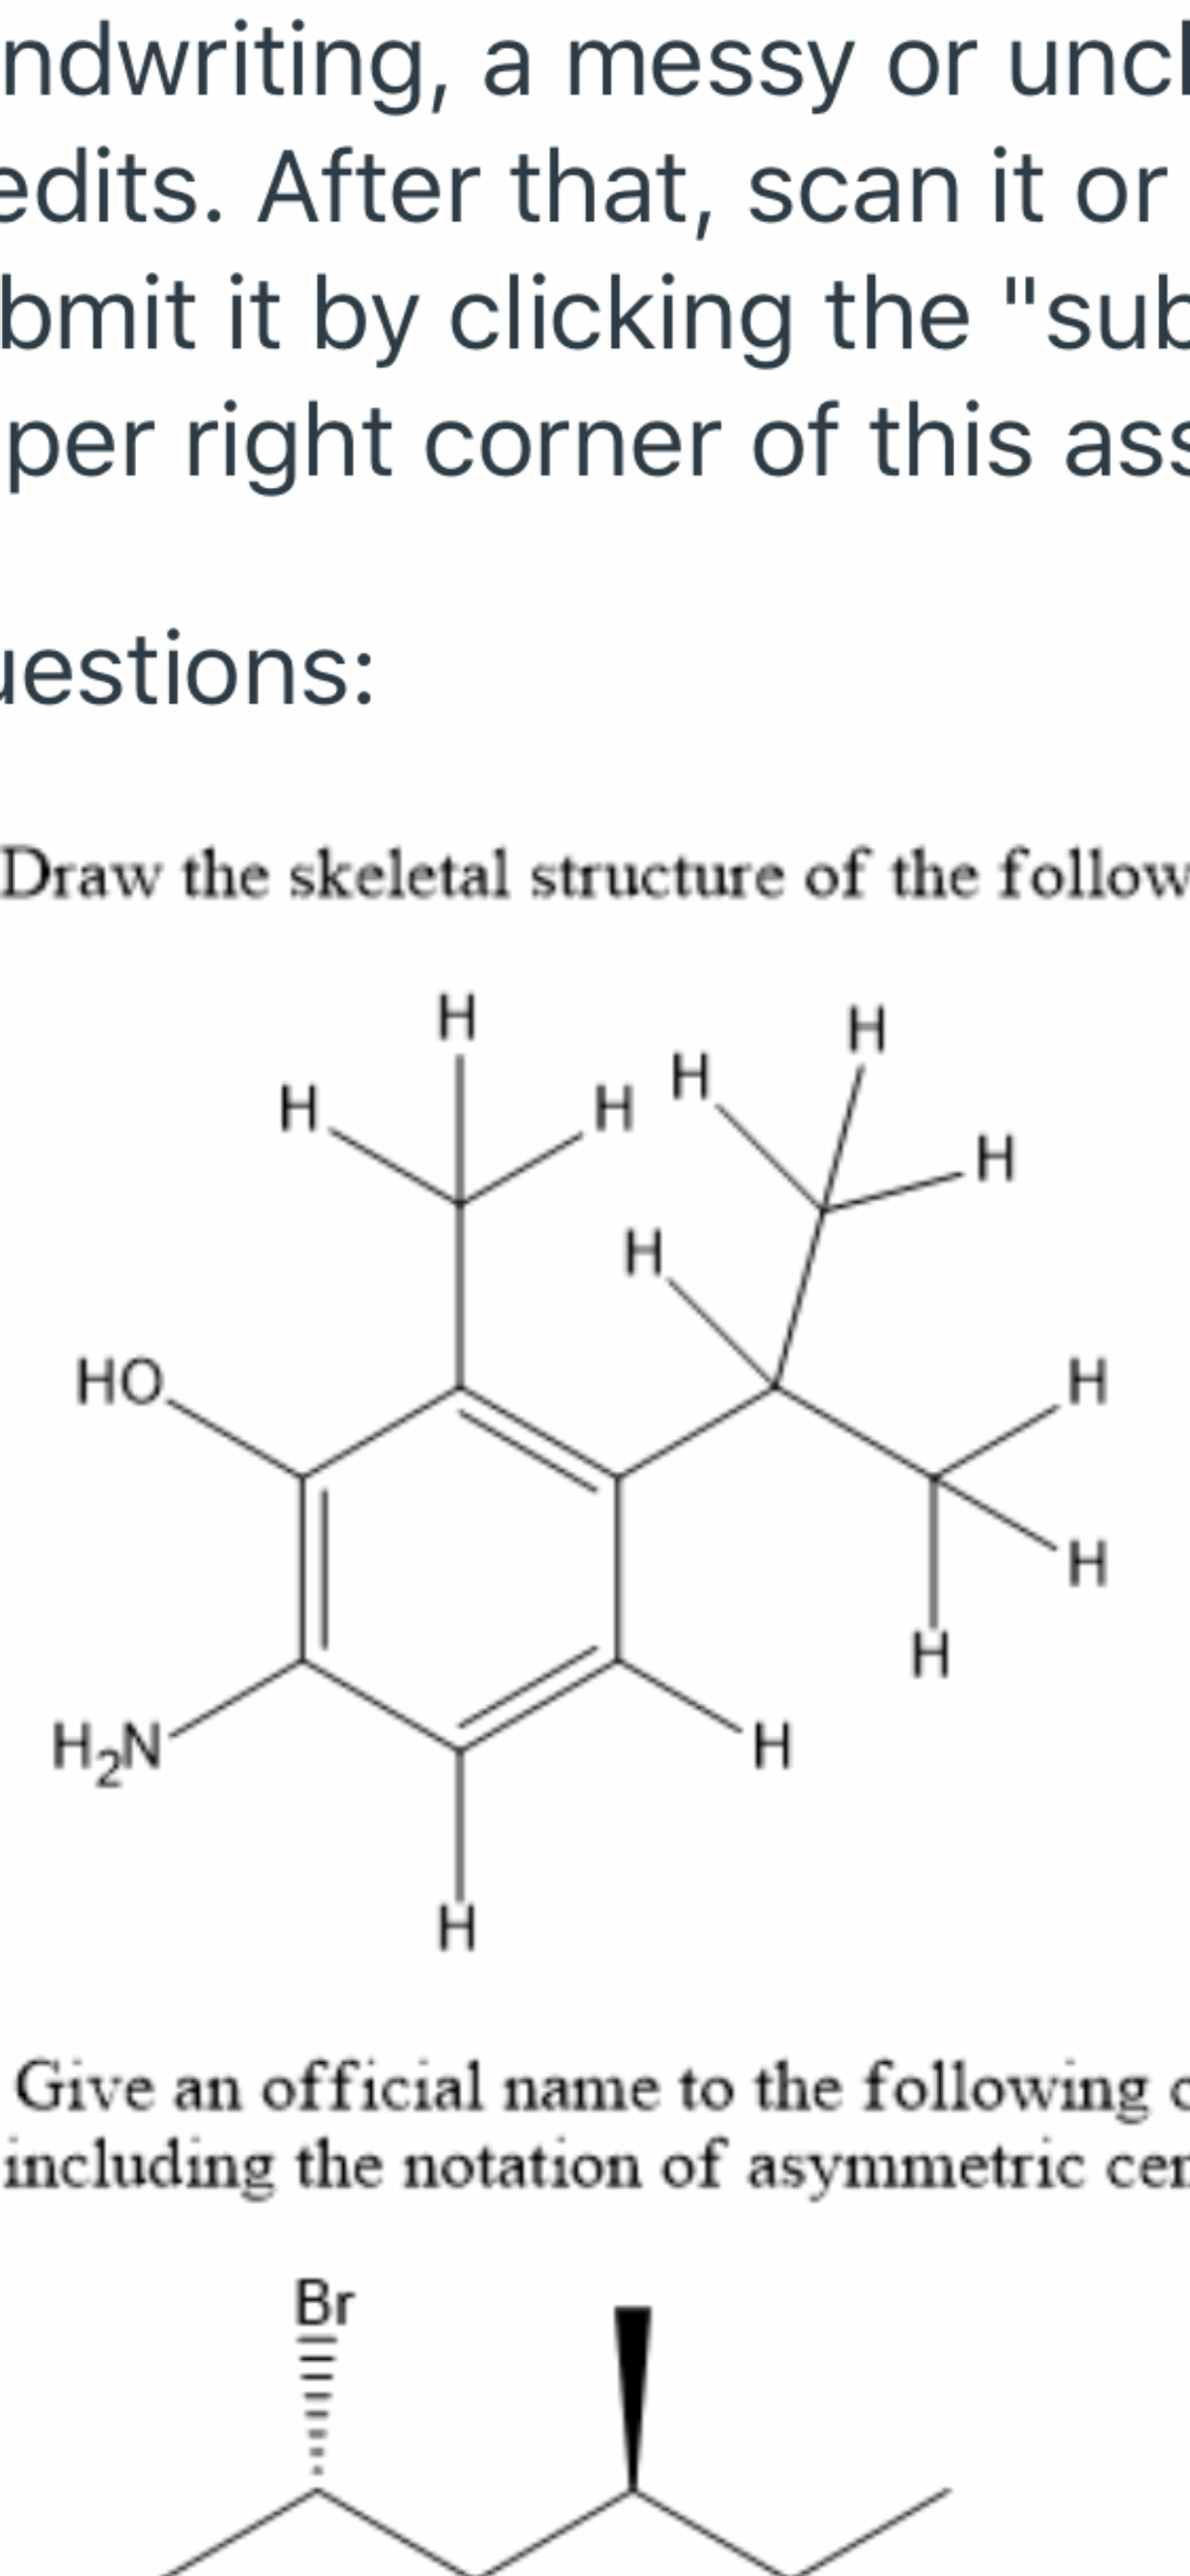 ndwriting, a messy or unc
edits. After that, scan it or
bmit it by clicking the "sub
per right corner of this ass
jestions:
Draw the skeletal structure of the follow
H
H.
HO.
H2N°
H.
Give an official name to the following c
including the notation of asymmetric cer
Br
I I
